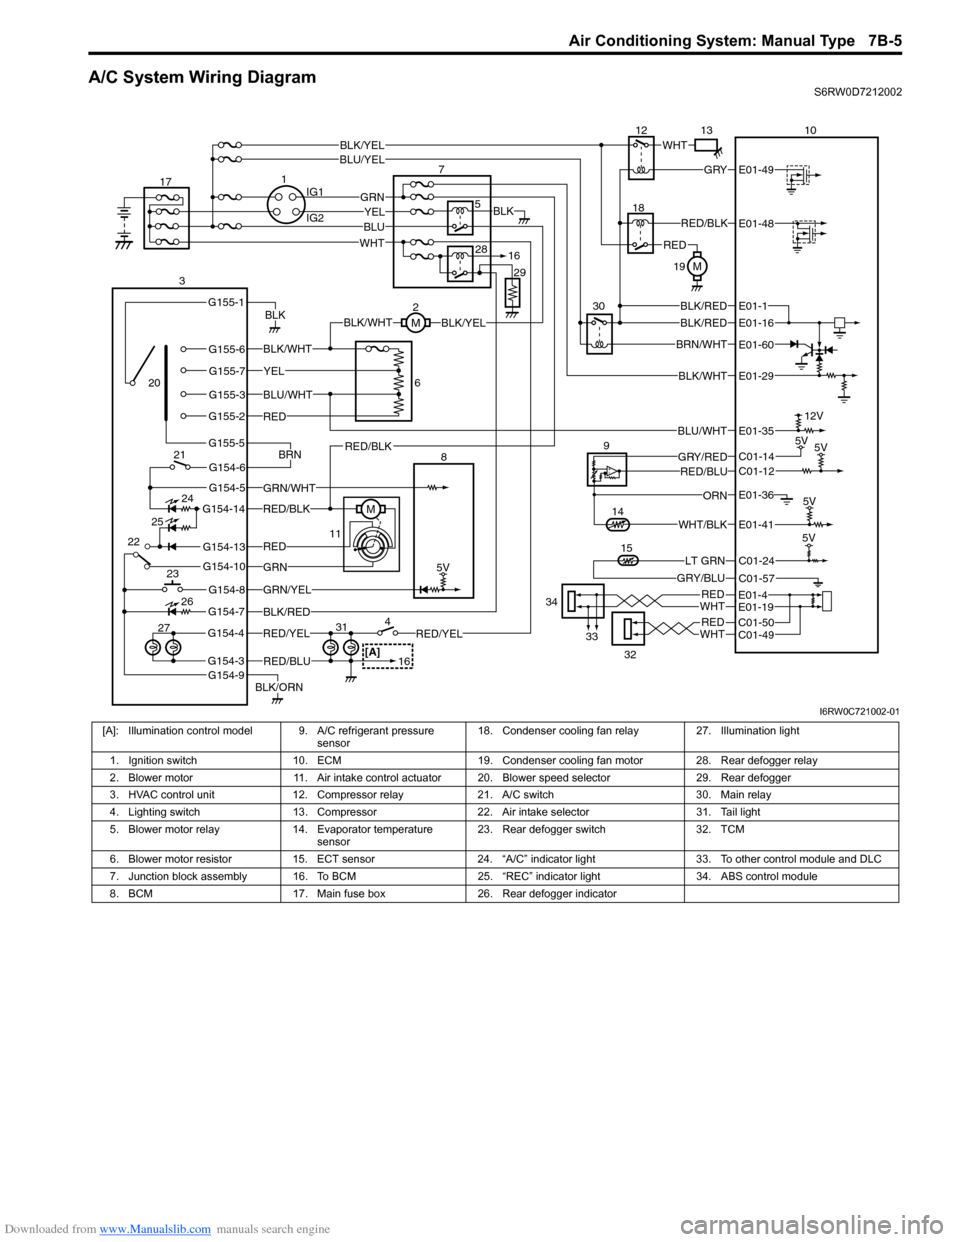 SUZUKI SX4 2006 1.G Service Workshop Manual Downloaded from www.Manualslib.com manuals search engine Air Conditioning System: Manual Type 7B-5
A/C System Wiring DiagramS6RW0D7212002
[A]
7
WHT
GRN5YELBLK
3
G154-3
G154-4
G154-7
G154-8
G154-10
G15